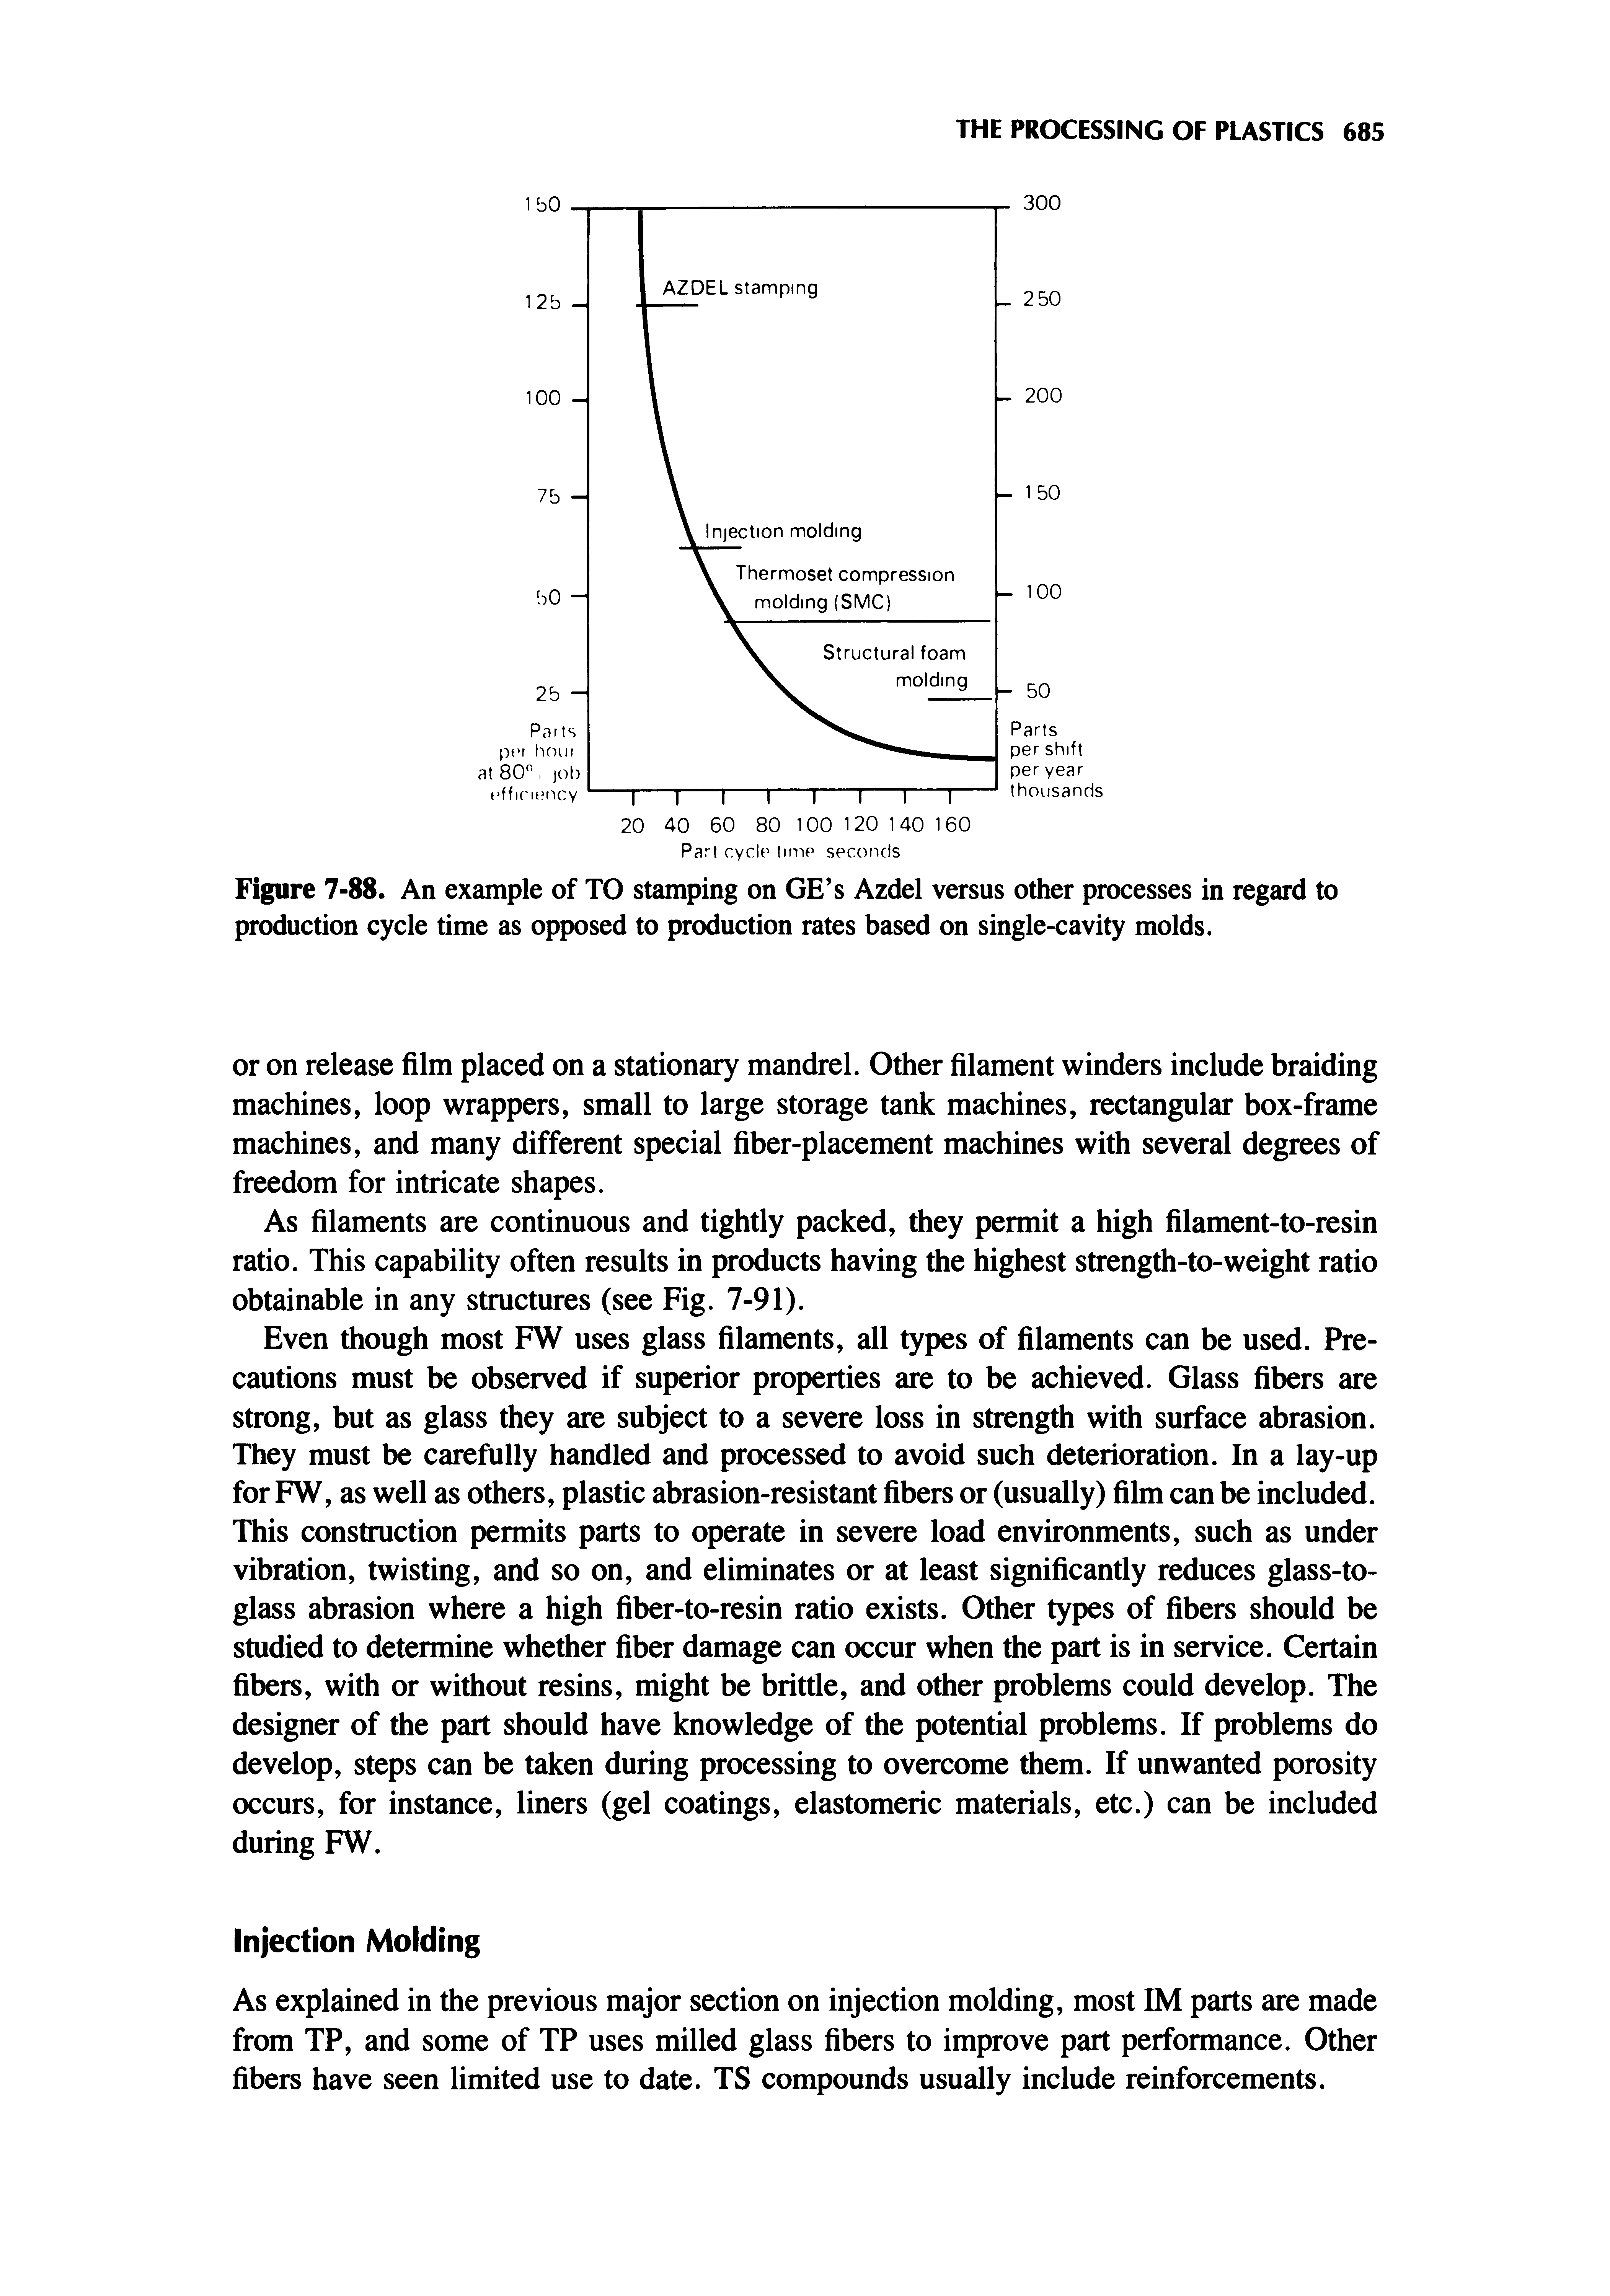 Figure 7-88. An example of TO stamping on GE s Azdel versus other processes in regard to production cycle time as opposed to production rates based on single-cavity molds.